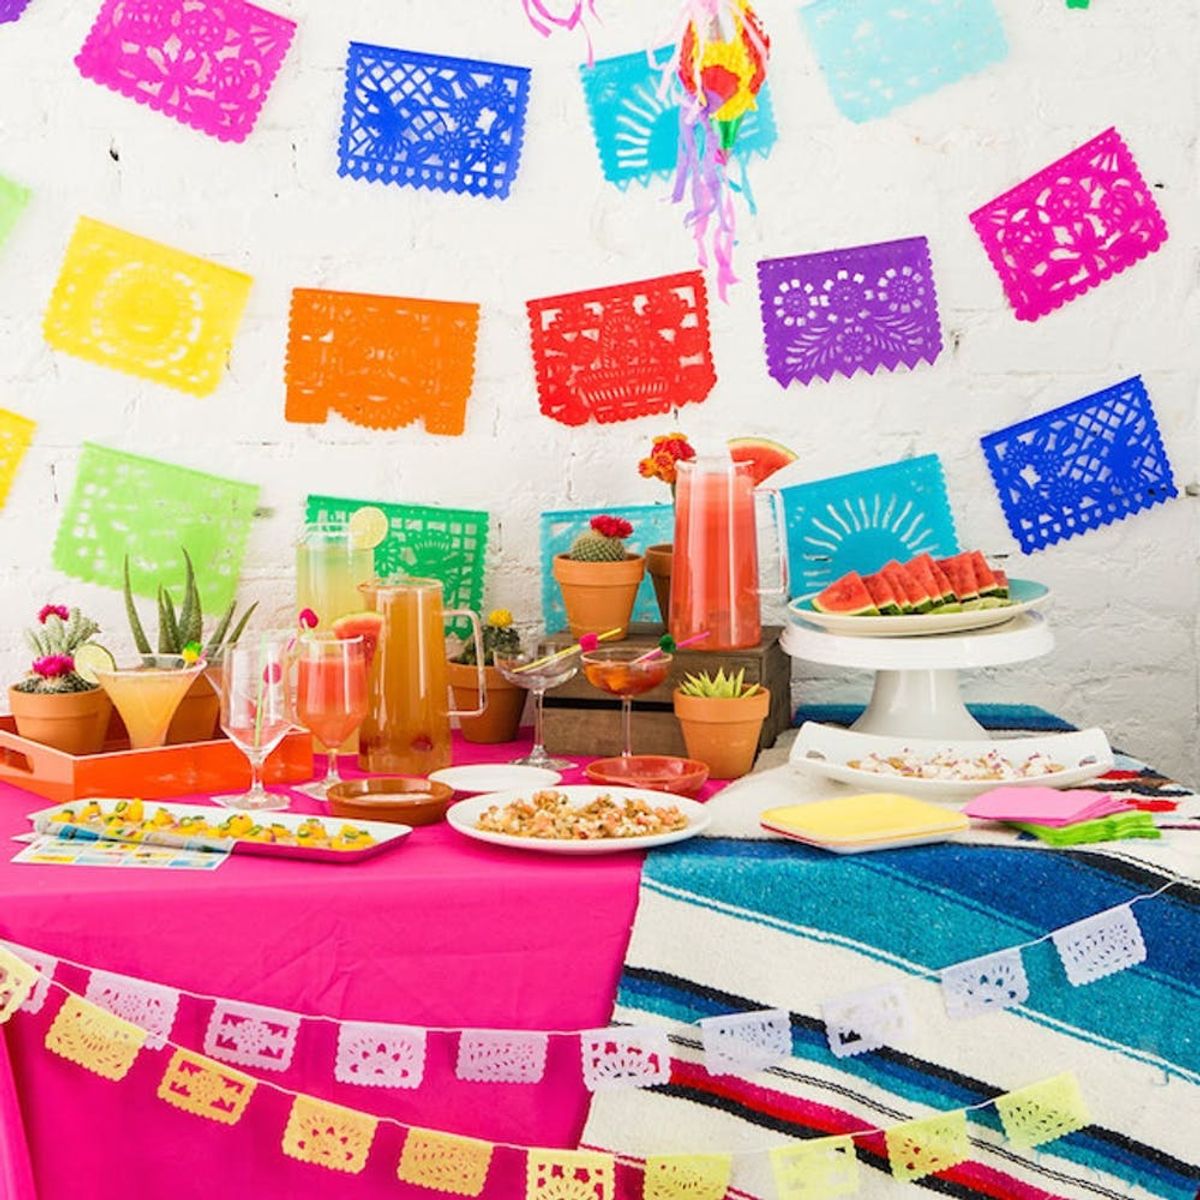 21 Party Themes for All Your Spring Get-Togethers